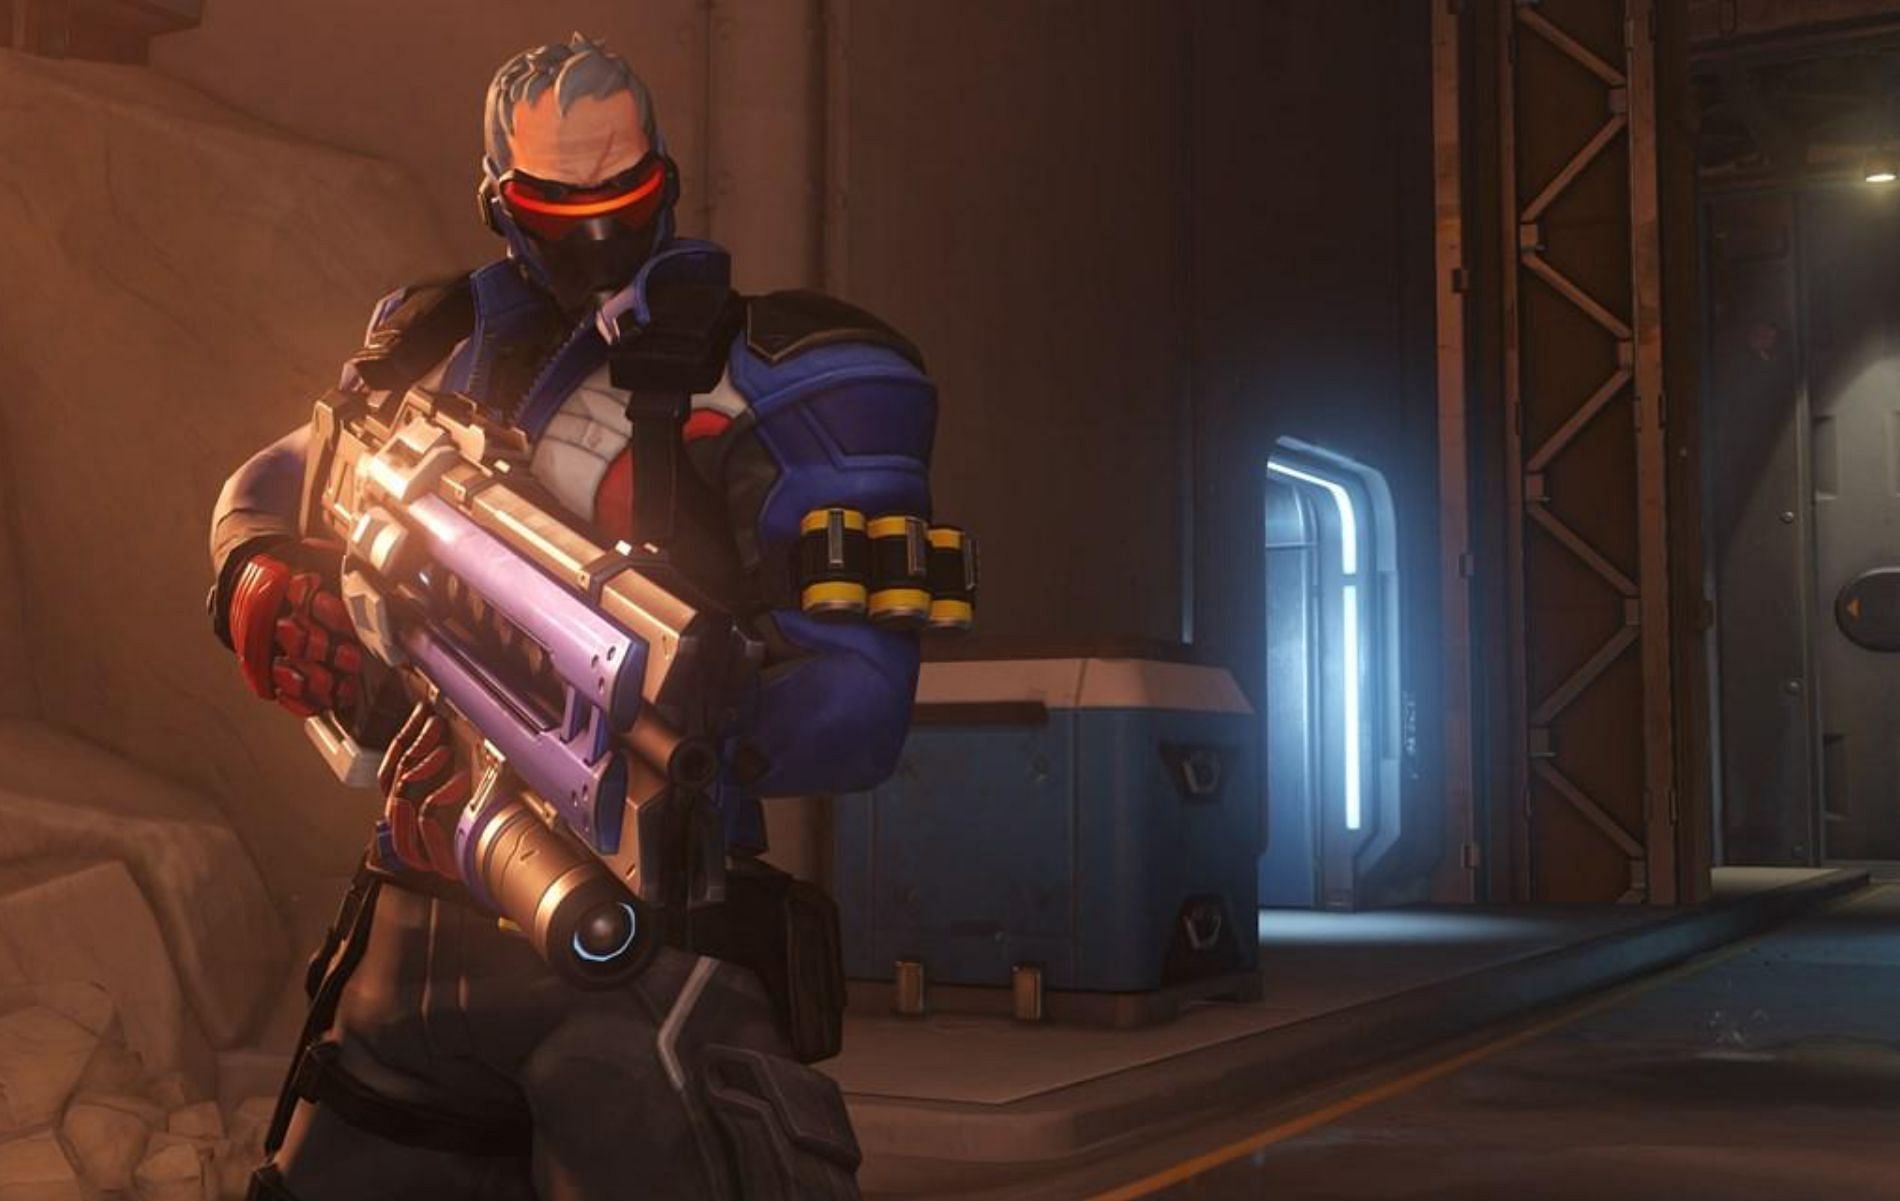 The re-worked version of Soldier 76 in Overwatch 2 Beta version (Image via Blizzard Entertainment)